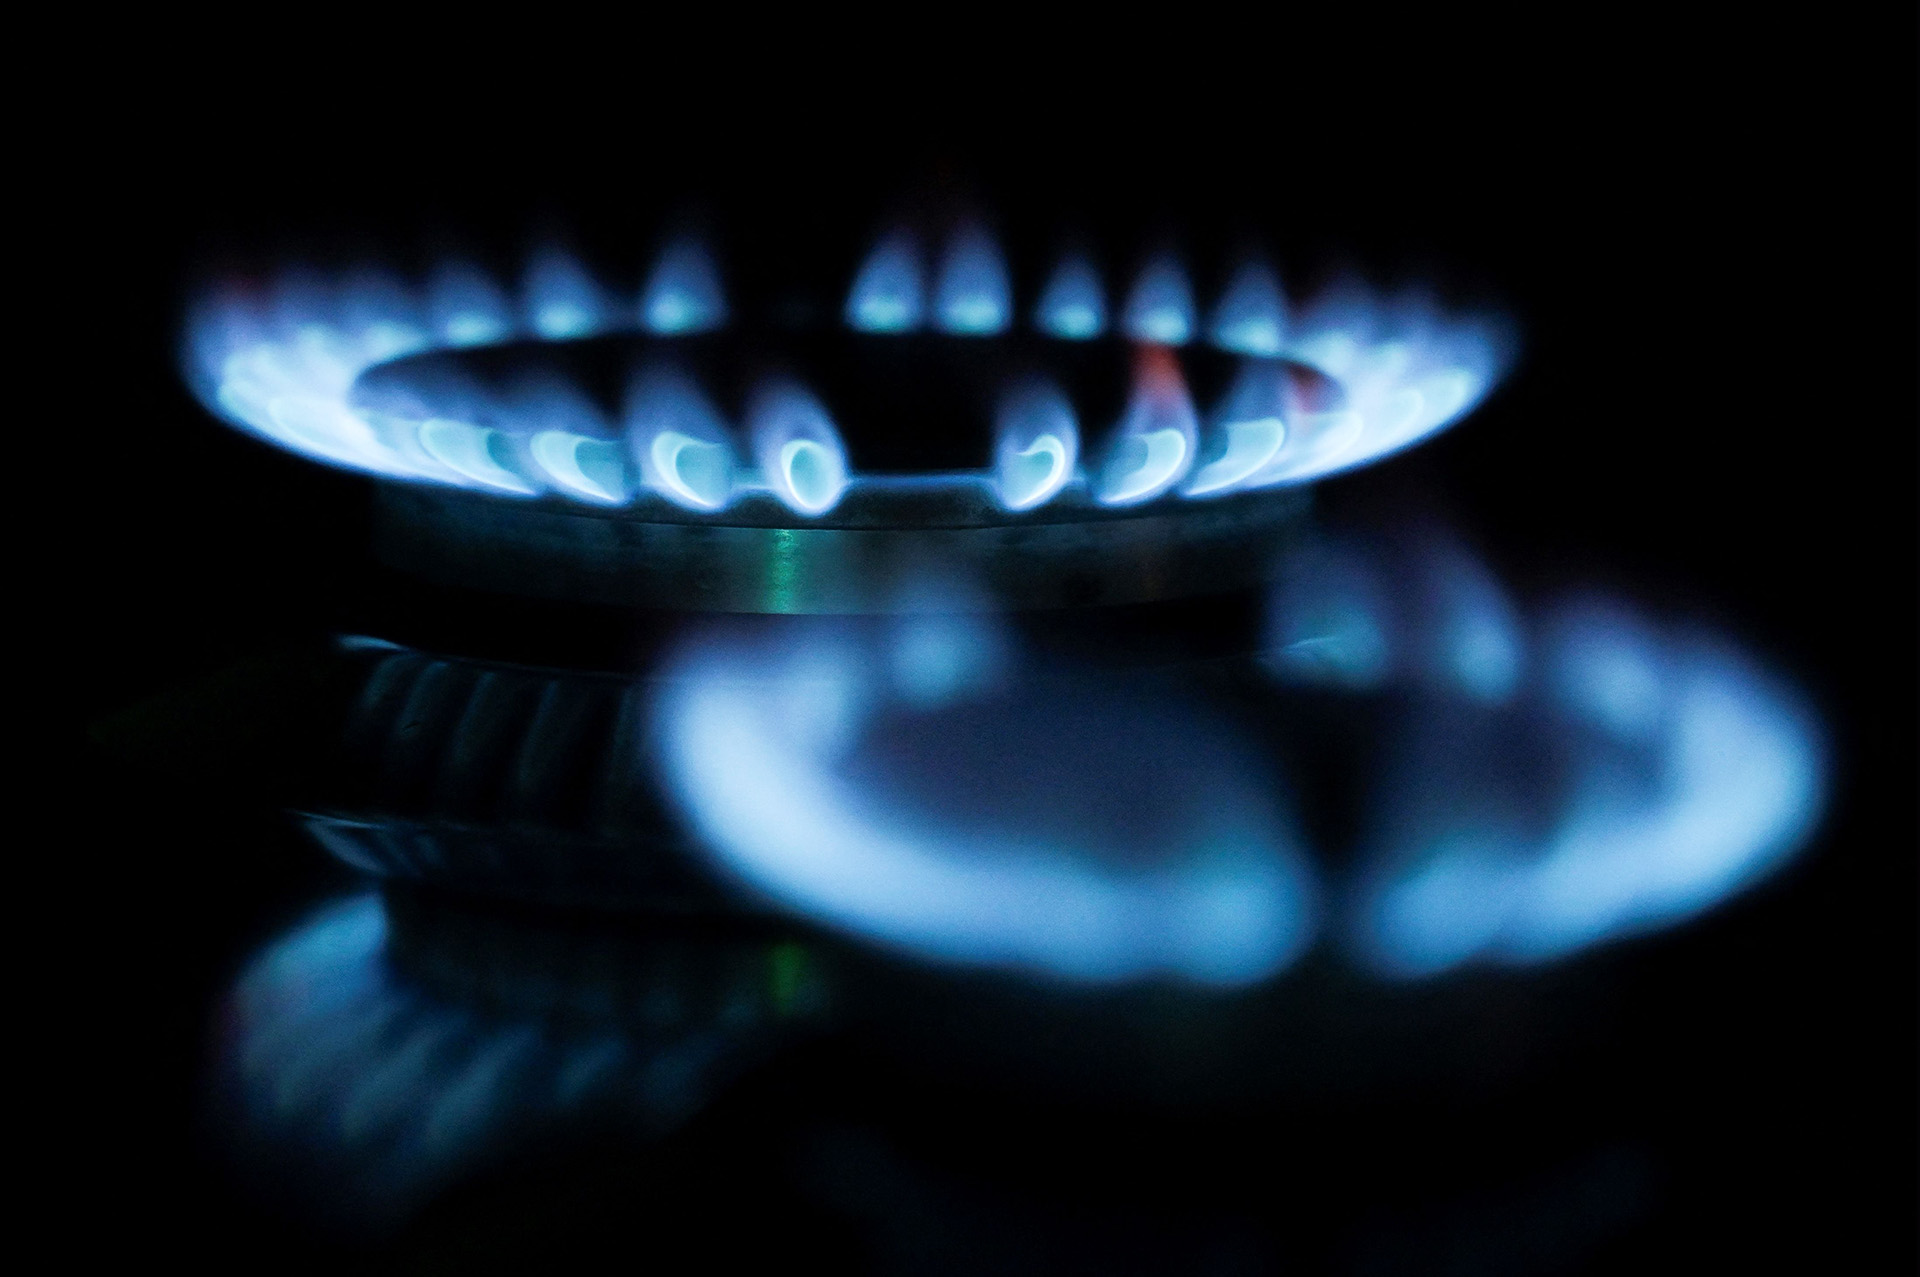 EU ministers agree on gas reduction plans – Finland has already cut